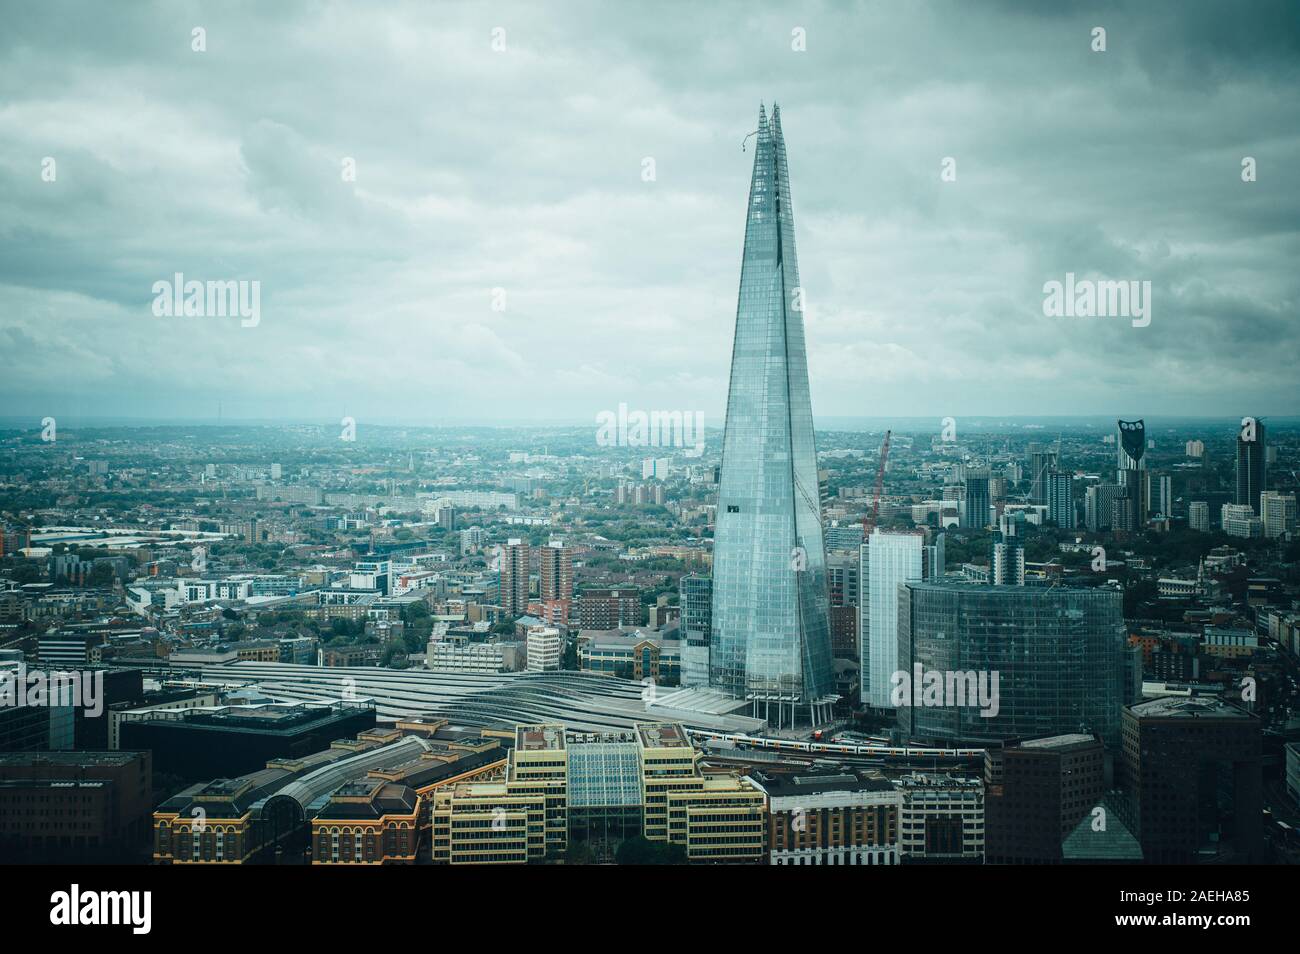 Aerial view of London with The Shard skyscraper and Thames river at sunset with grey clouds in the sky. Stock Photo